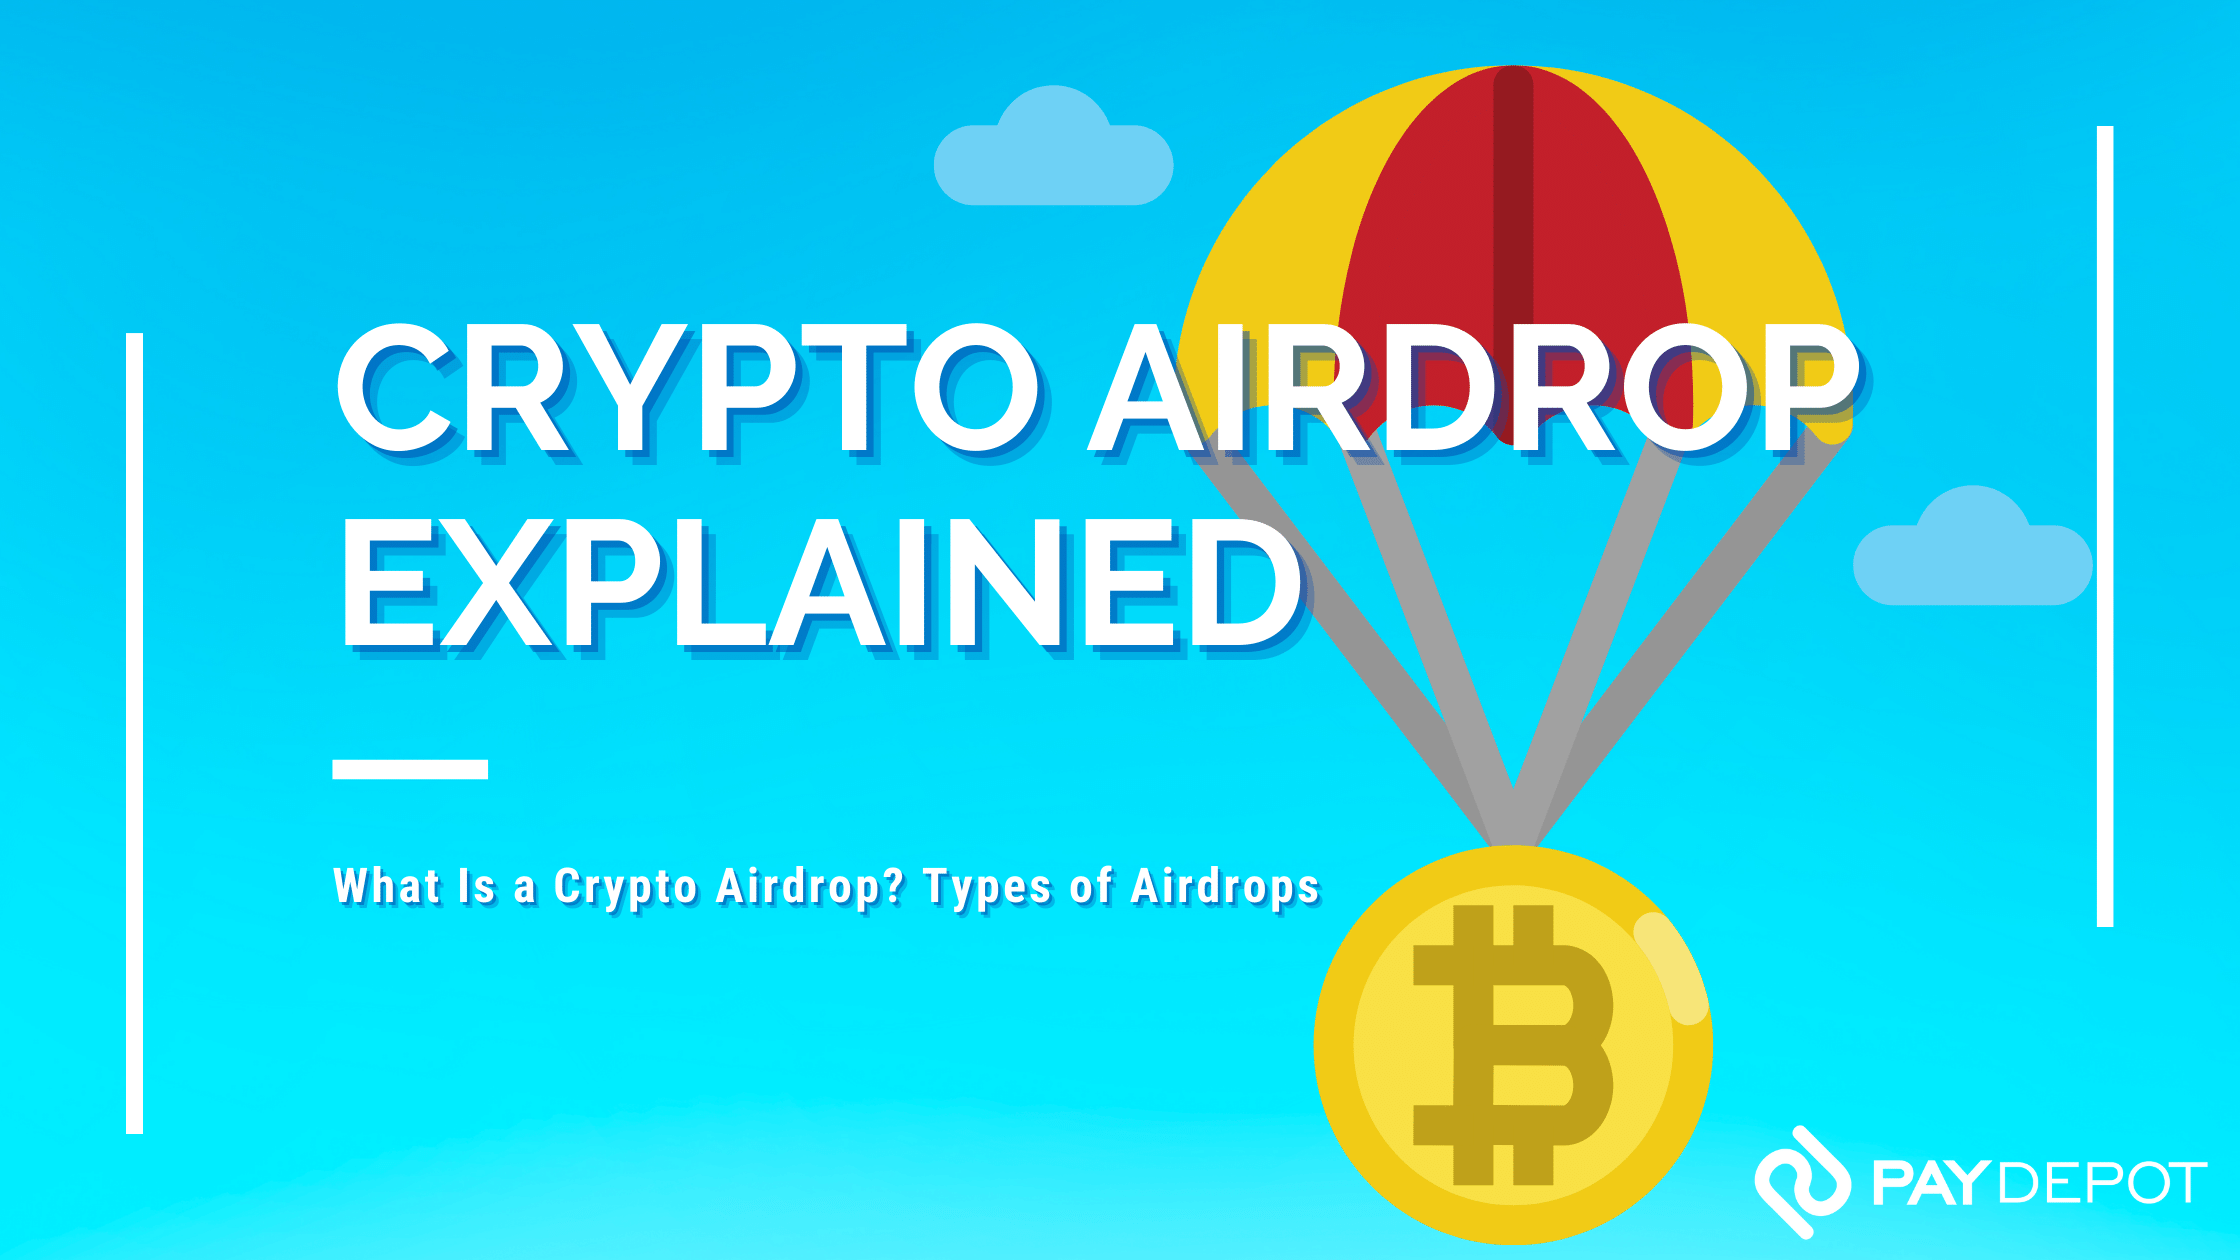 BitDAO x Bybit airdrop - Earn crypto & join the best airdrops, giveaways and more! - Airdrop Alert